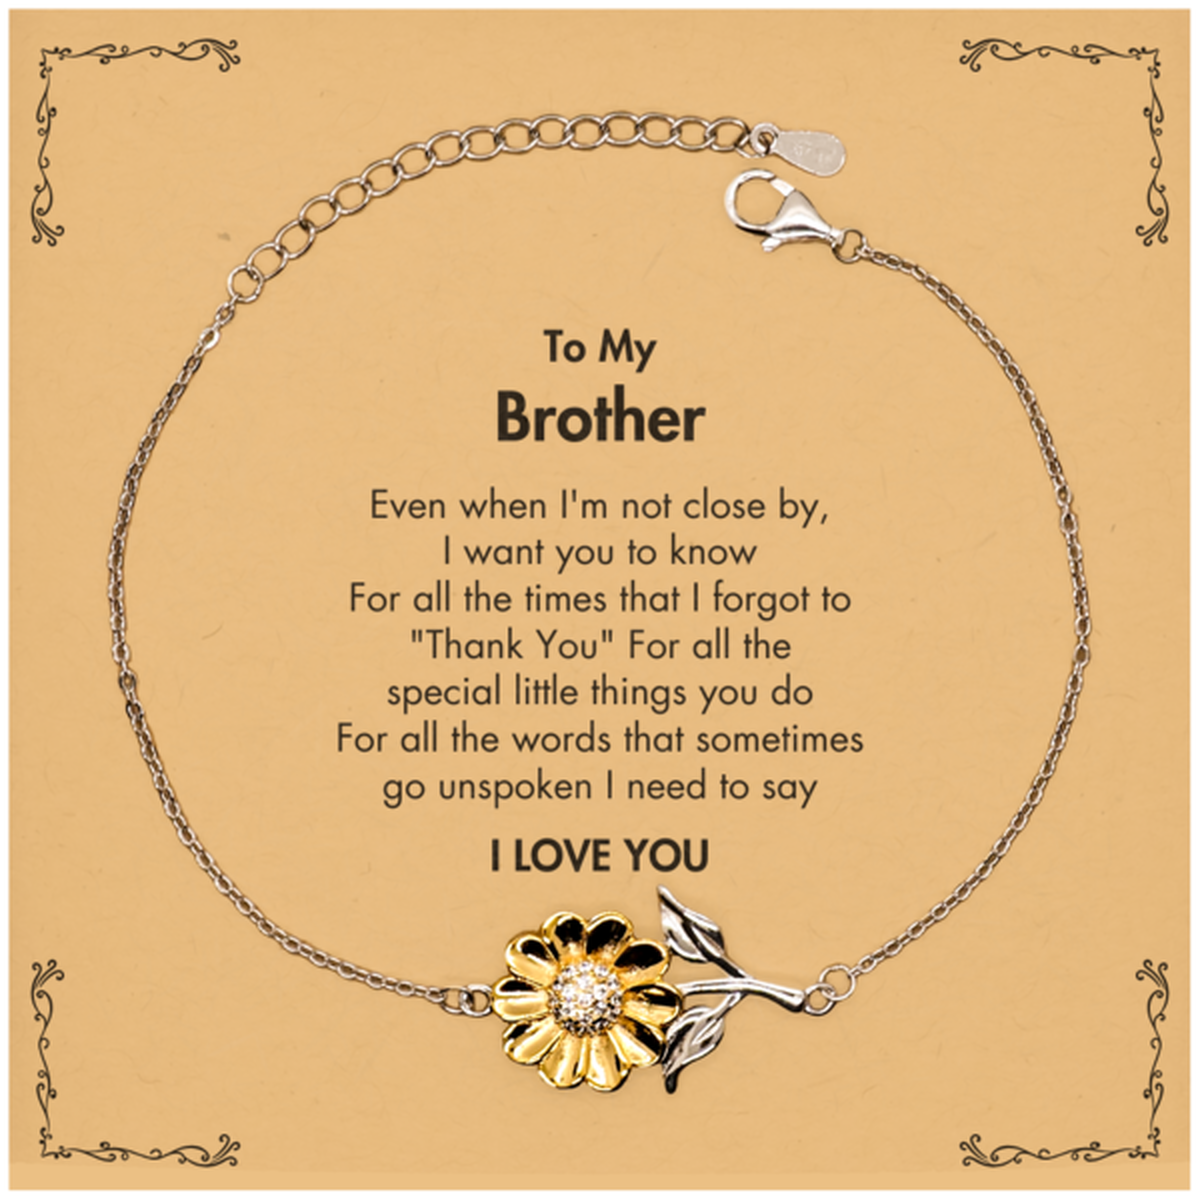 Thank You Gifts for Brother, Keepsake Sunflower Bracelet Gifts for Brother Birthday Mother's day Father's Day Brother For all the words That sometimes go unspoken I need to say I LOVE YOU